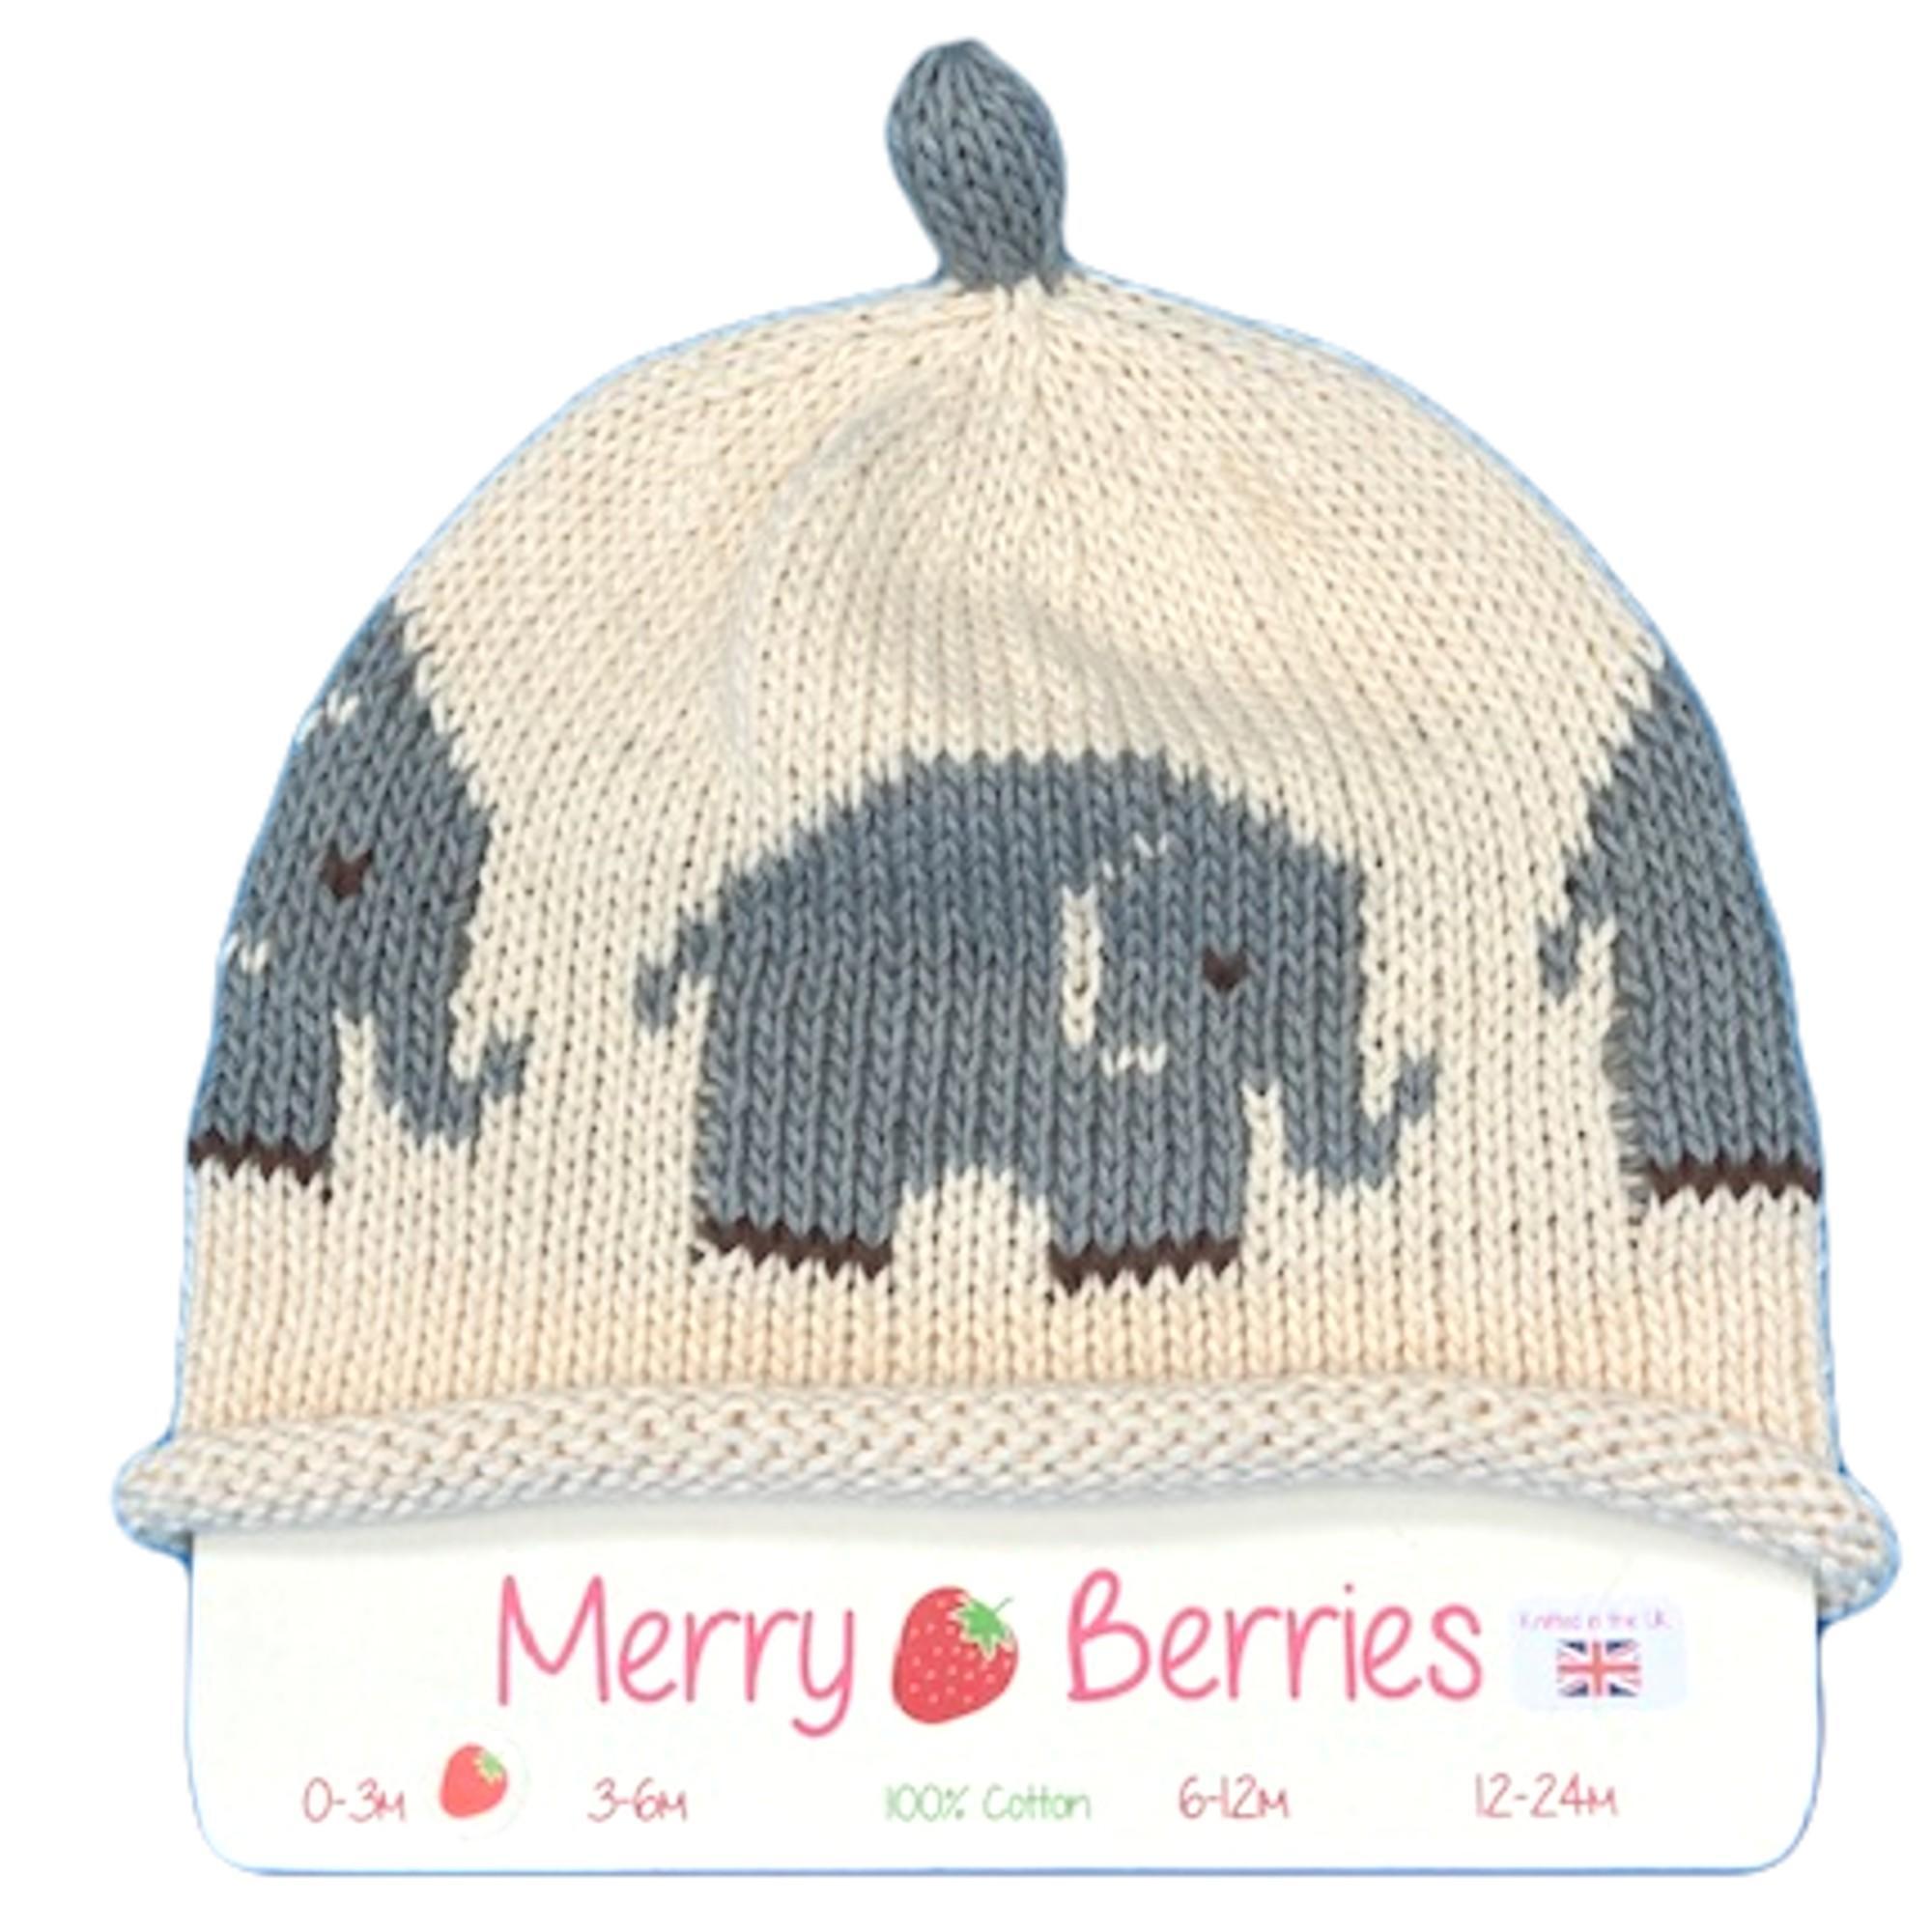 Merry Berries- Grey Elephant Knitted Baby Hat- 0-24 Months- Cotton